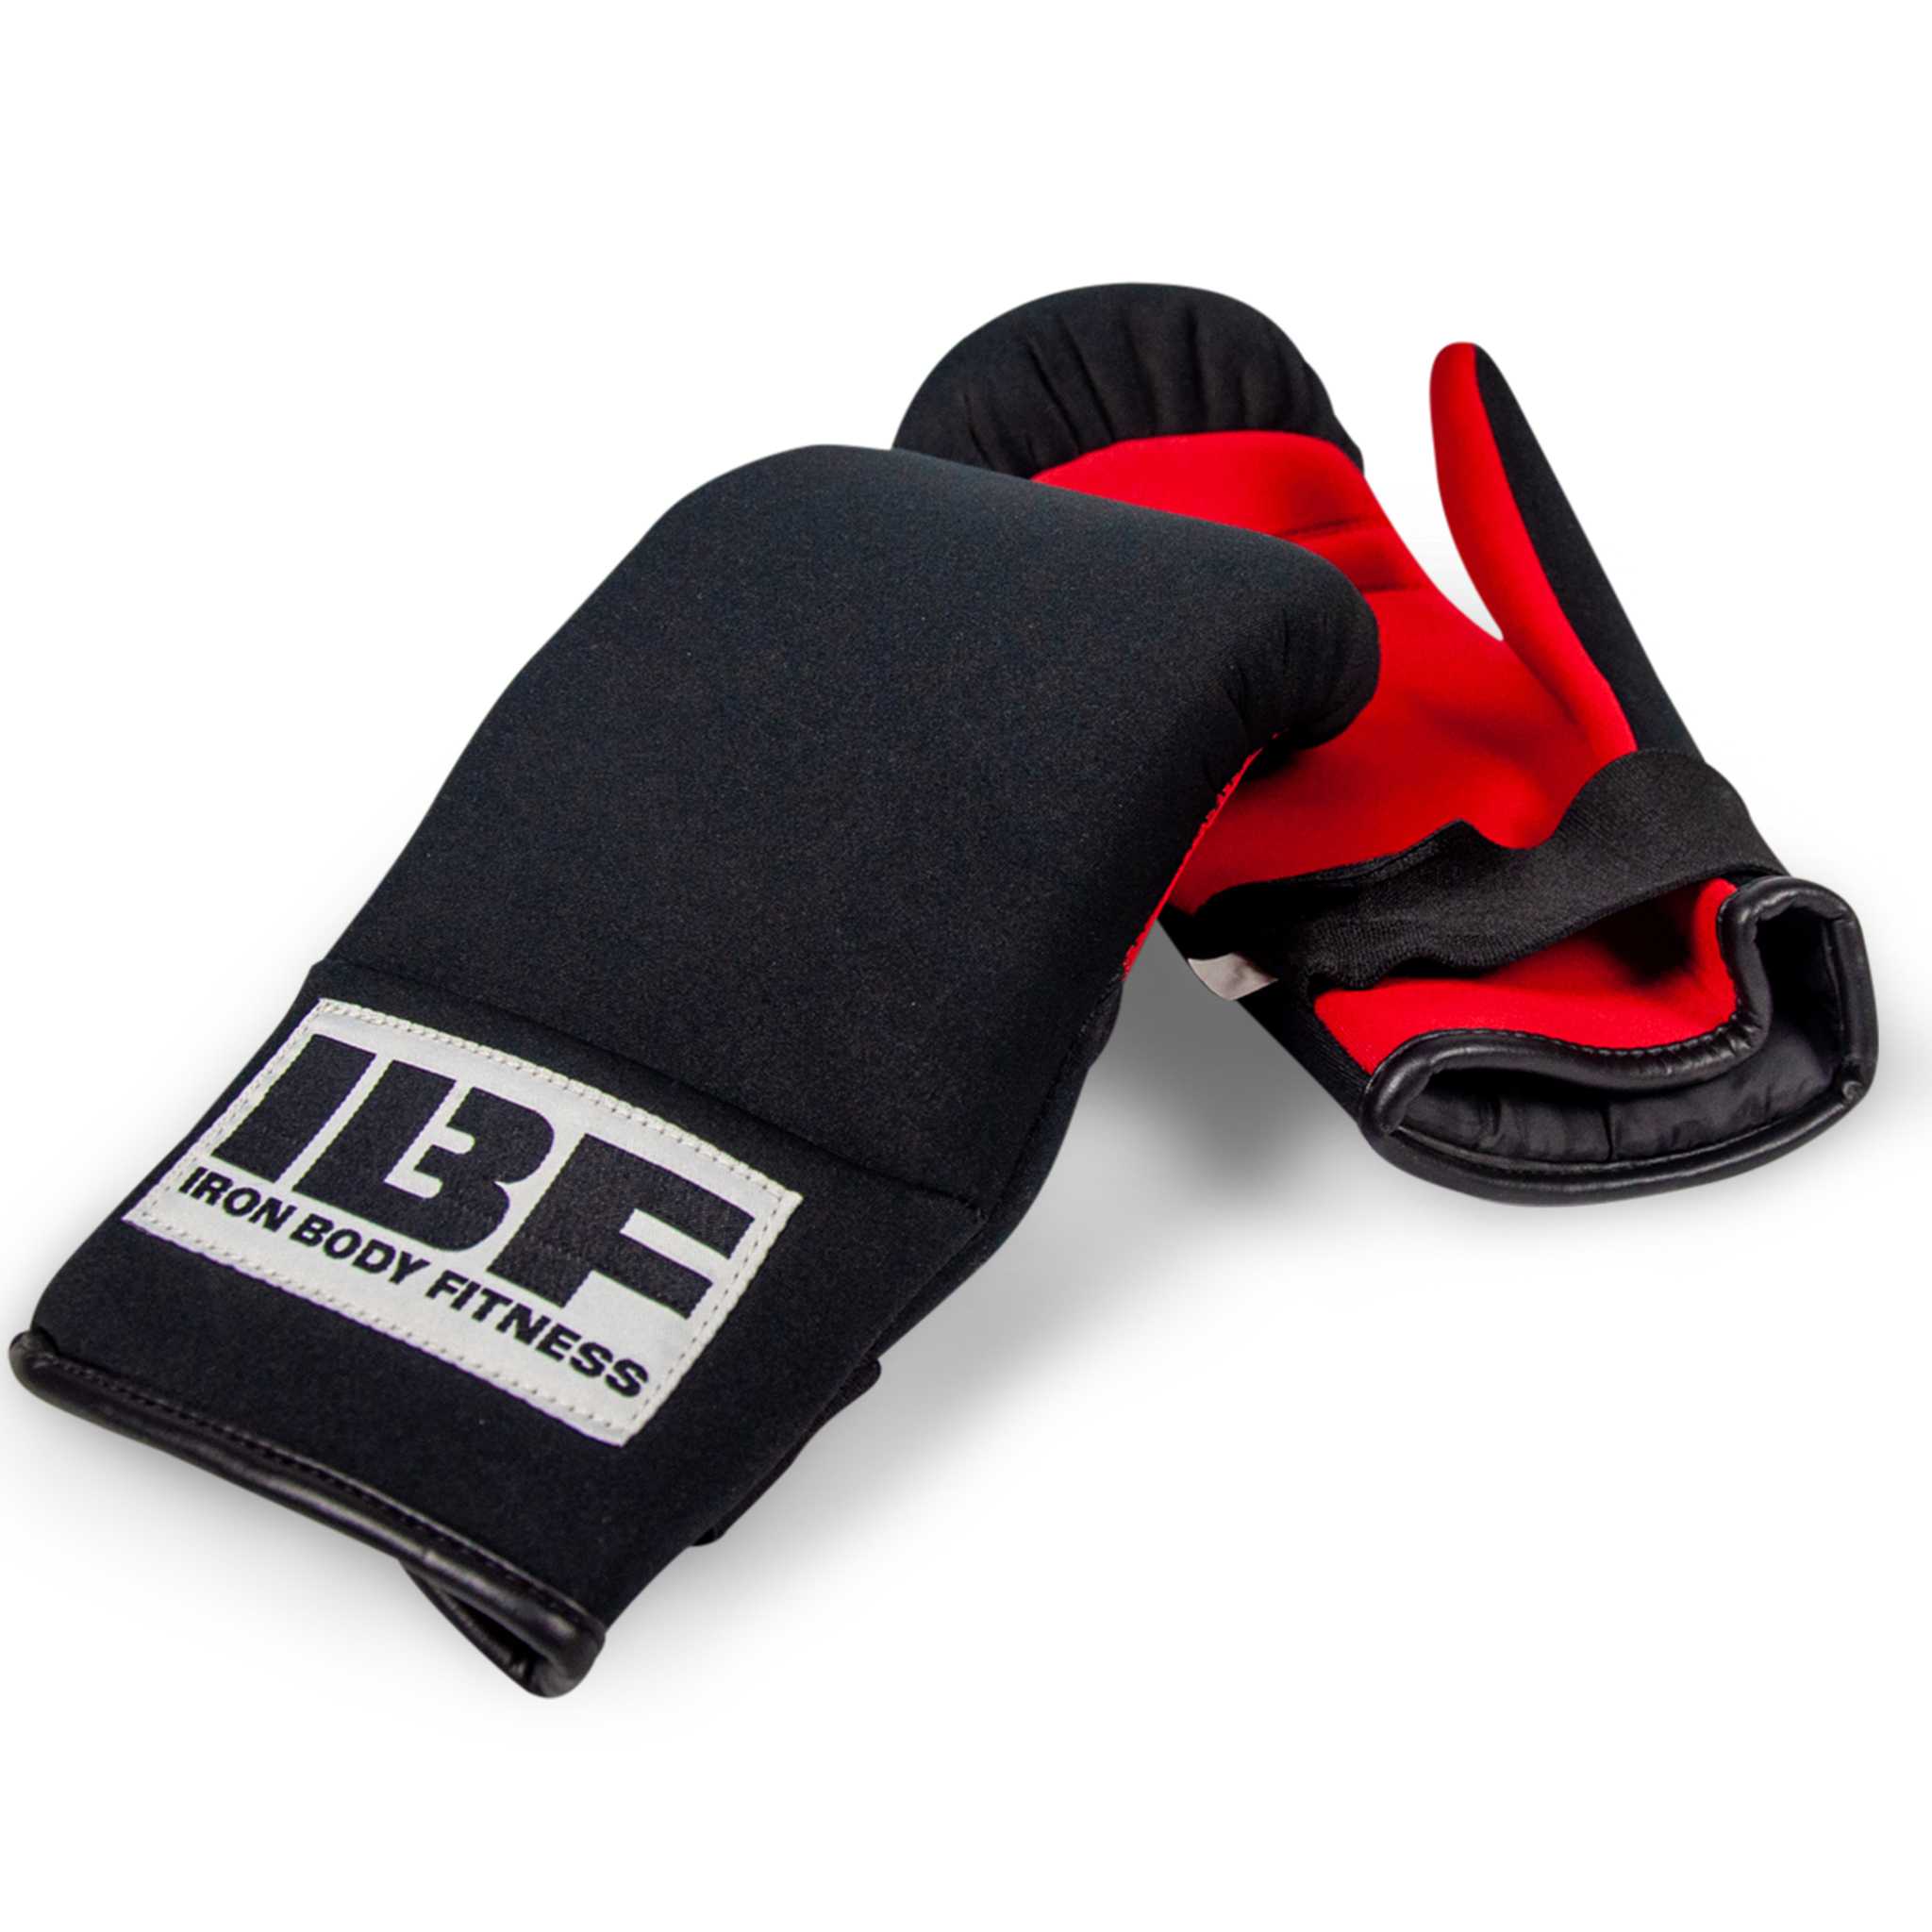 IBF Lightweight Bag Gloves for Boxing & MMA Training